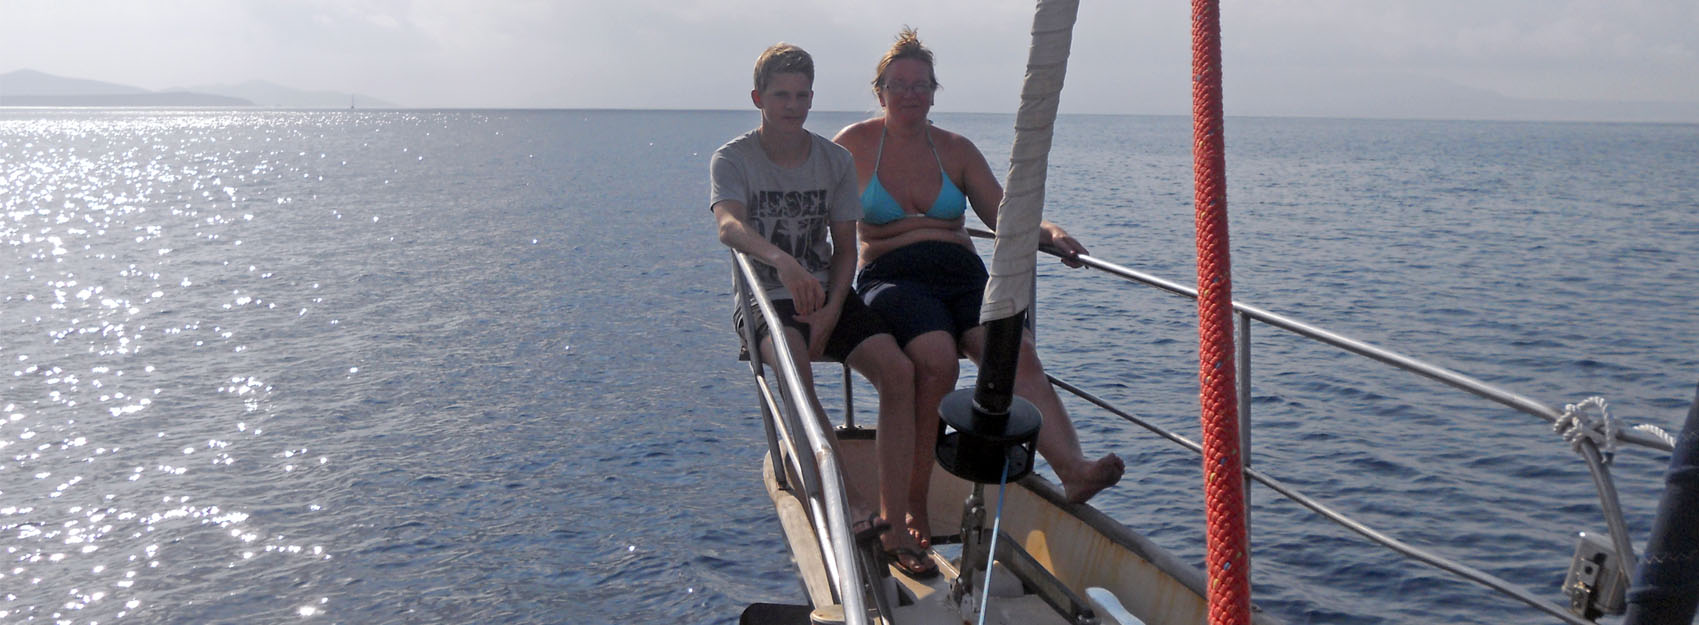 Fredrik and Mette on a short visit to Kos